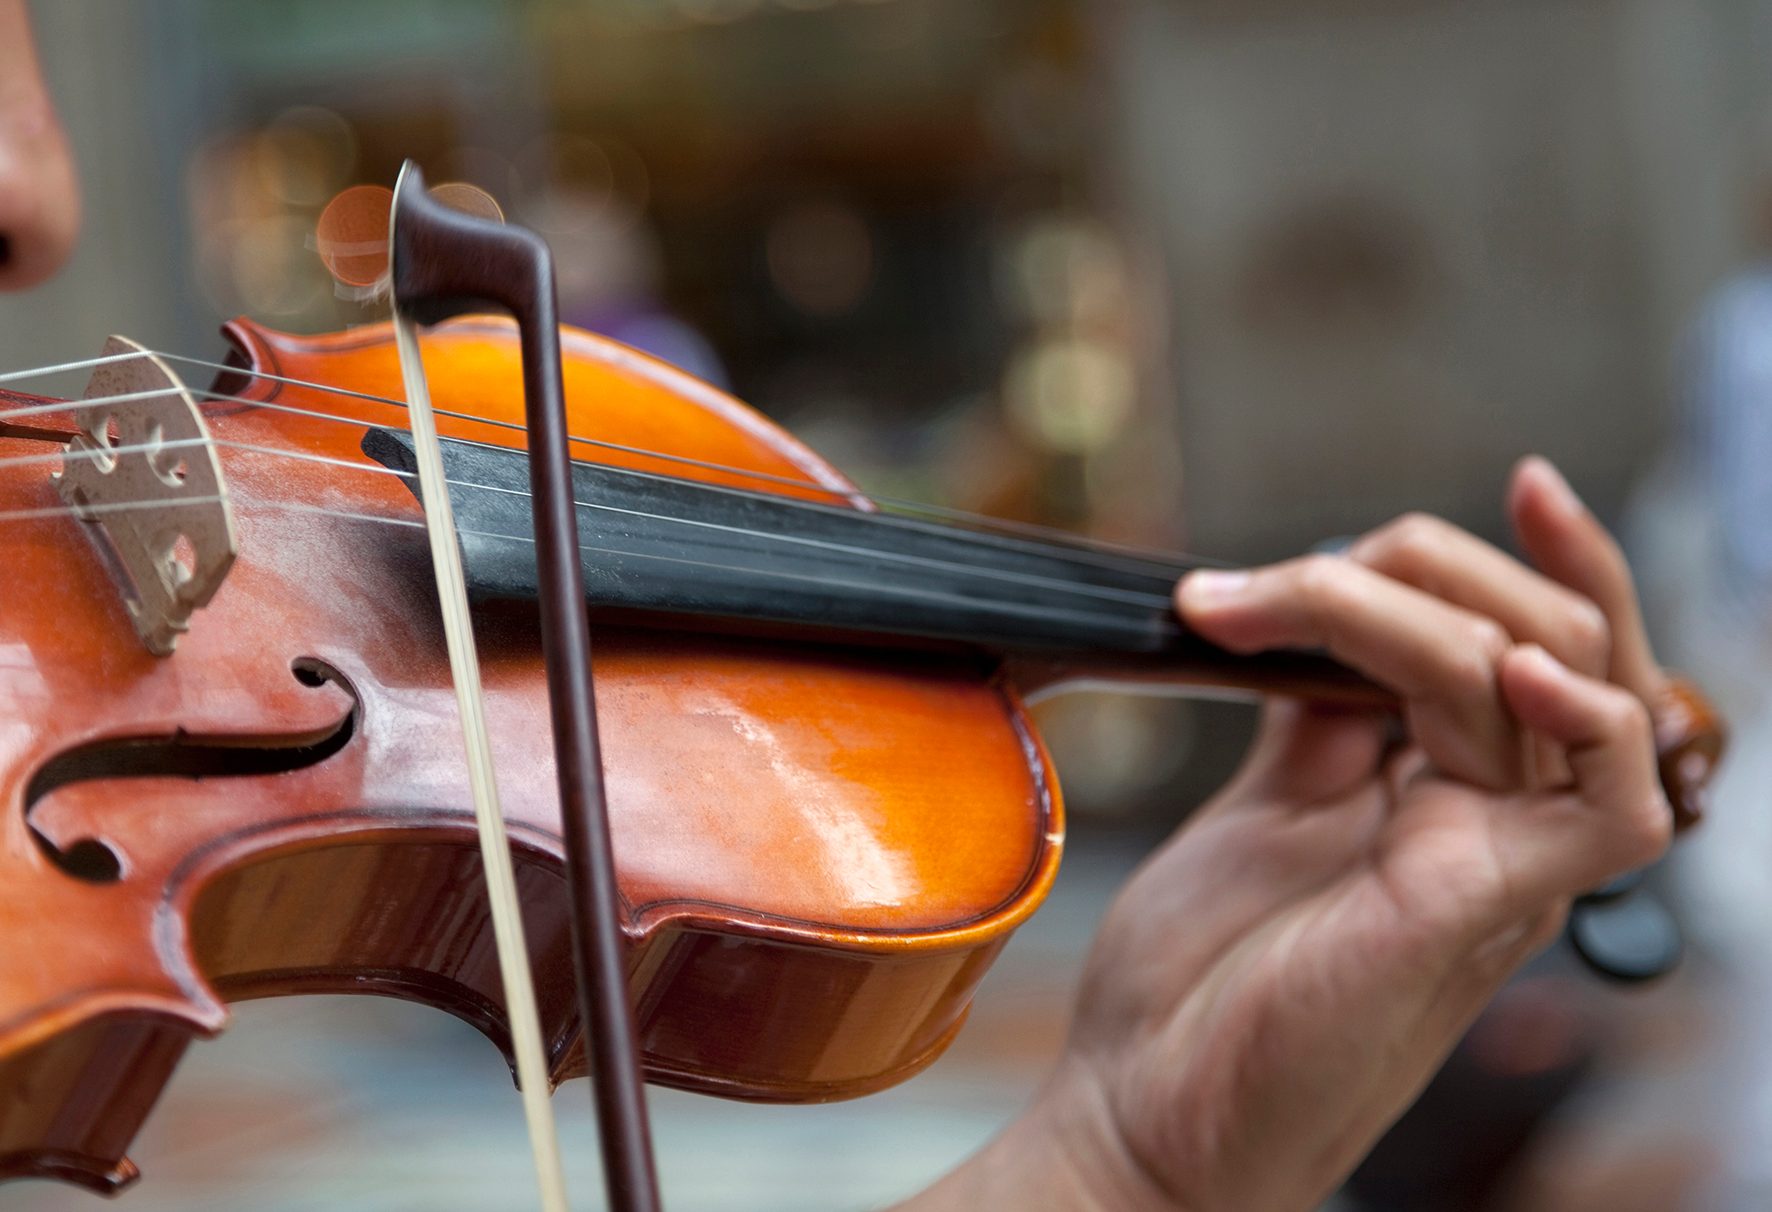 Best Country Songs to Practice using your Violin